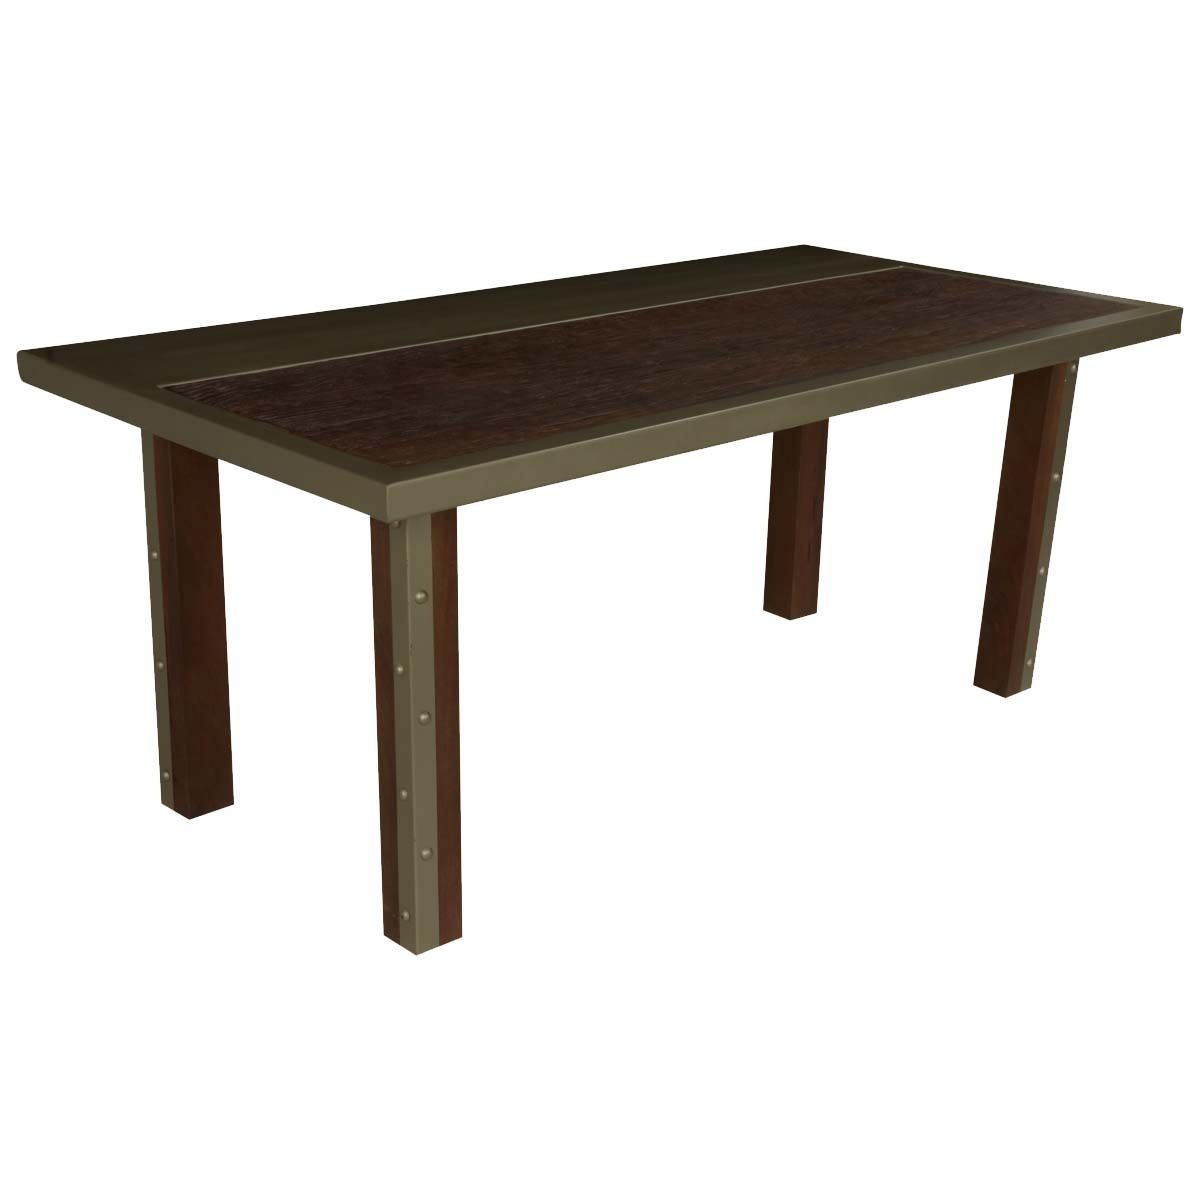 Most Recent Mango Wood/iron Dining Tables Inside Modern Industrial Mango Wood & Iron 71” Dining Table (View 9 of 25)